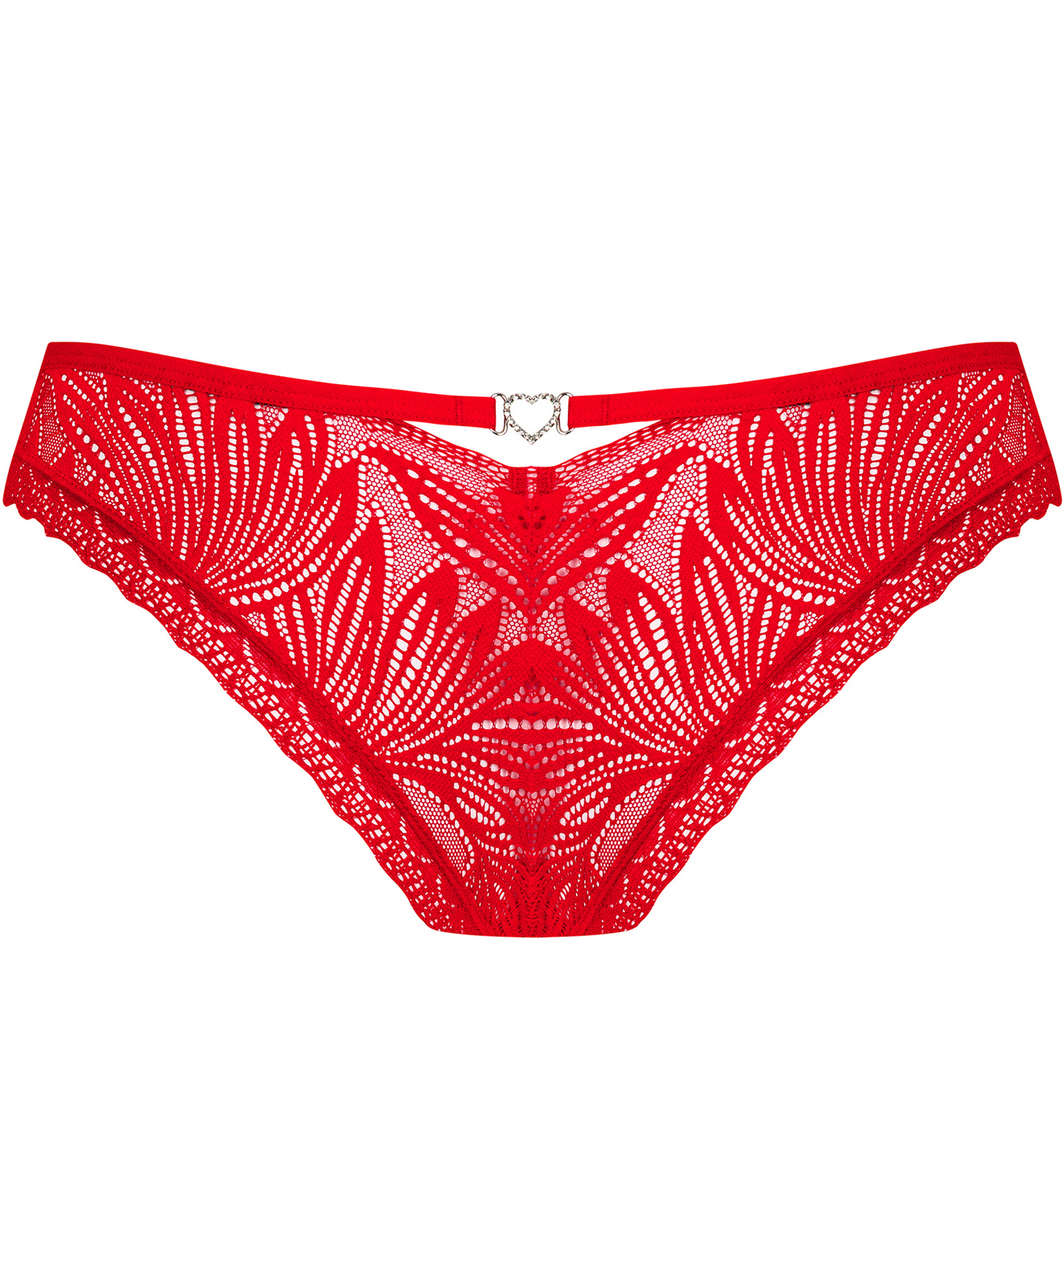 Obsessive Chilisa red lace panties